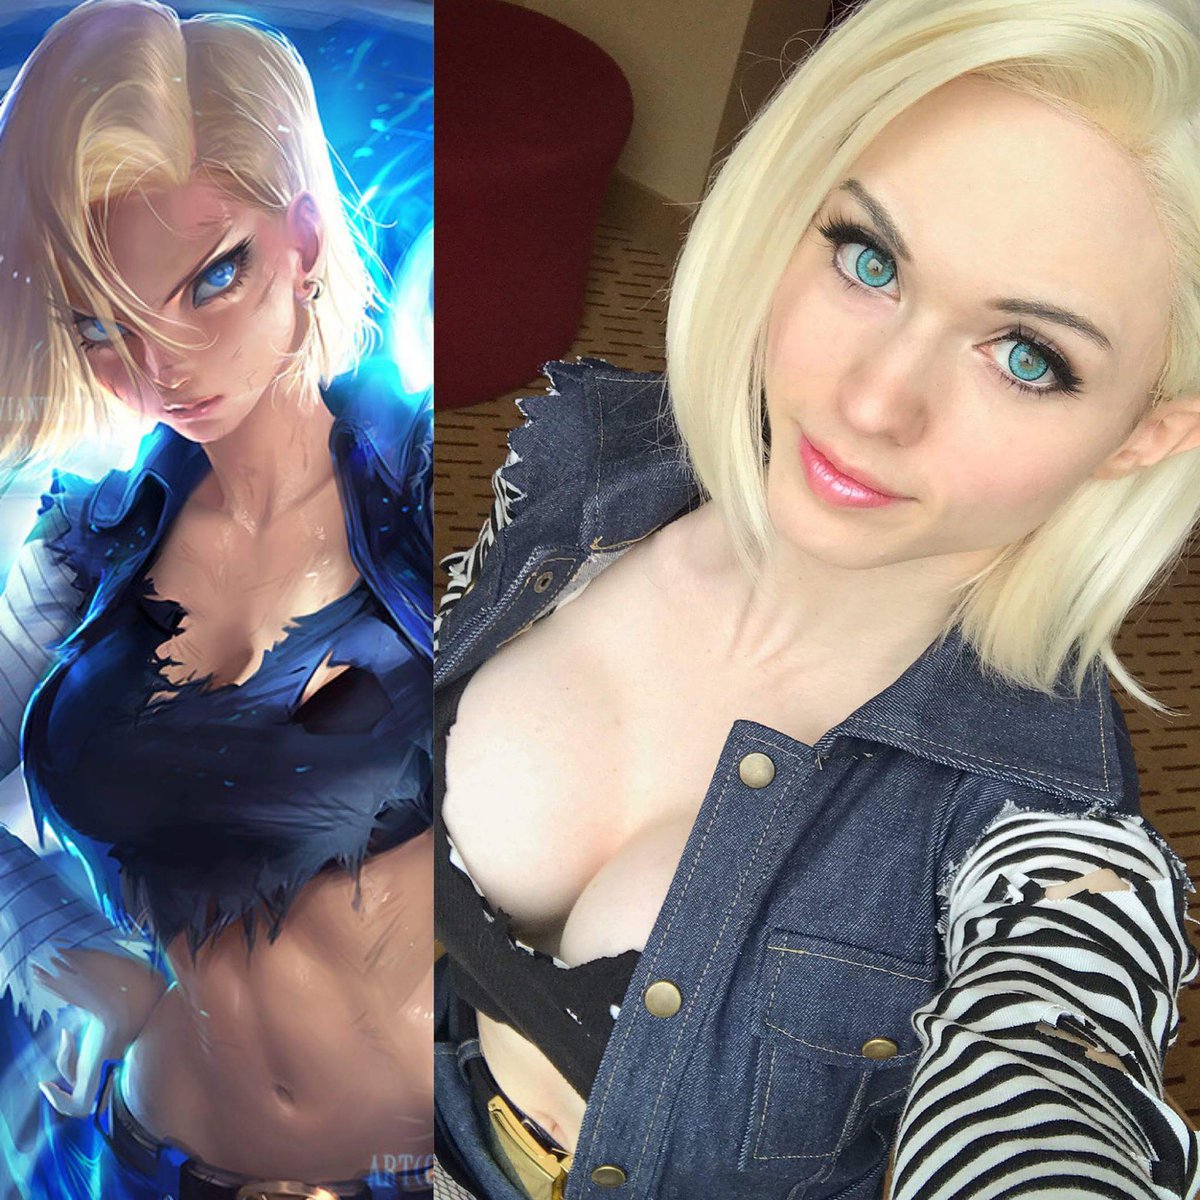 Android 18 From Dragon Ball Z Cosplay Done By Amourant